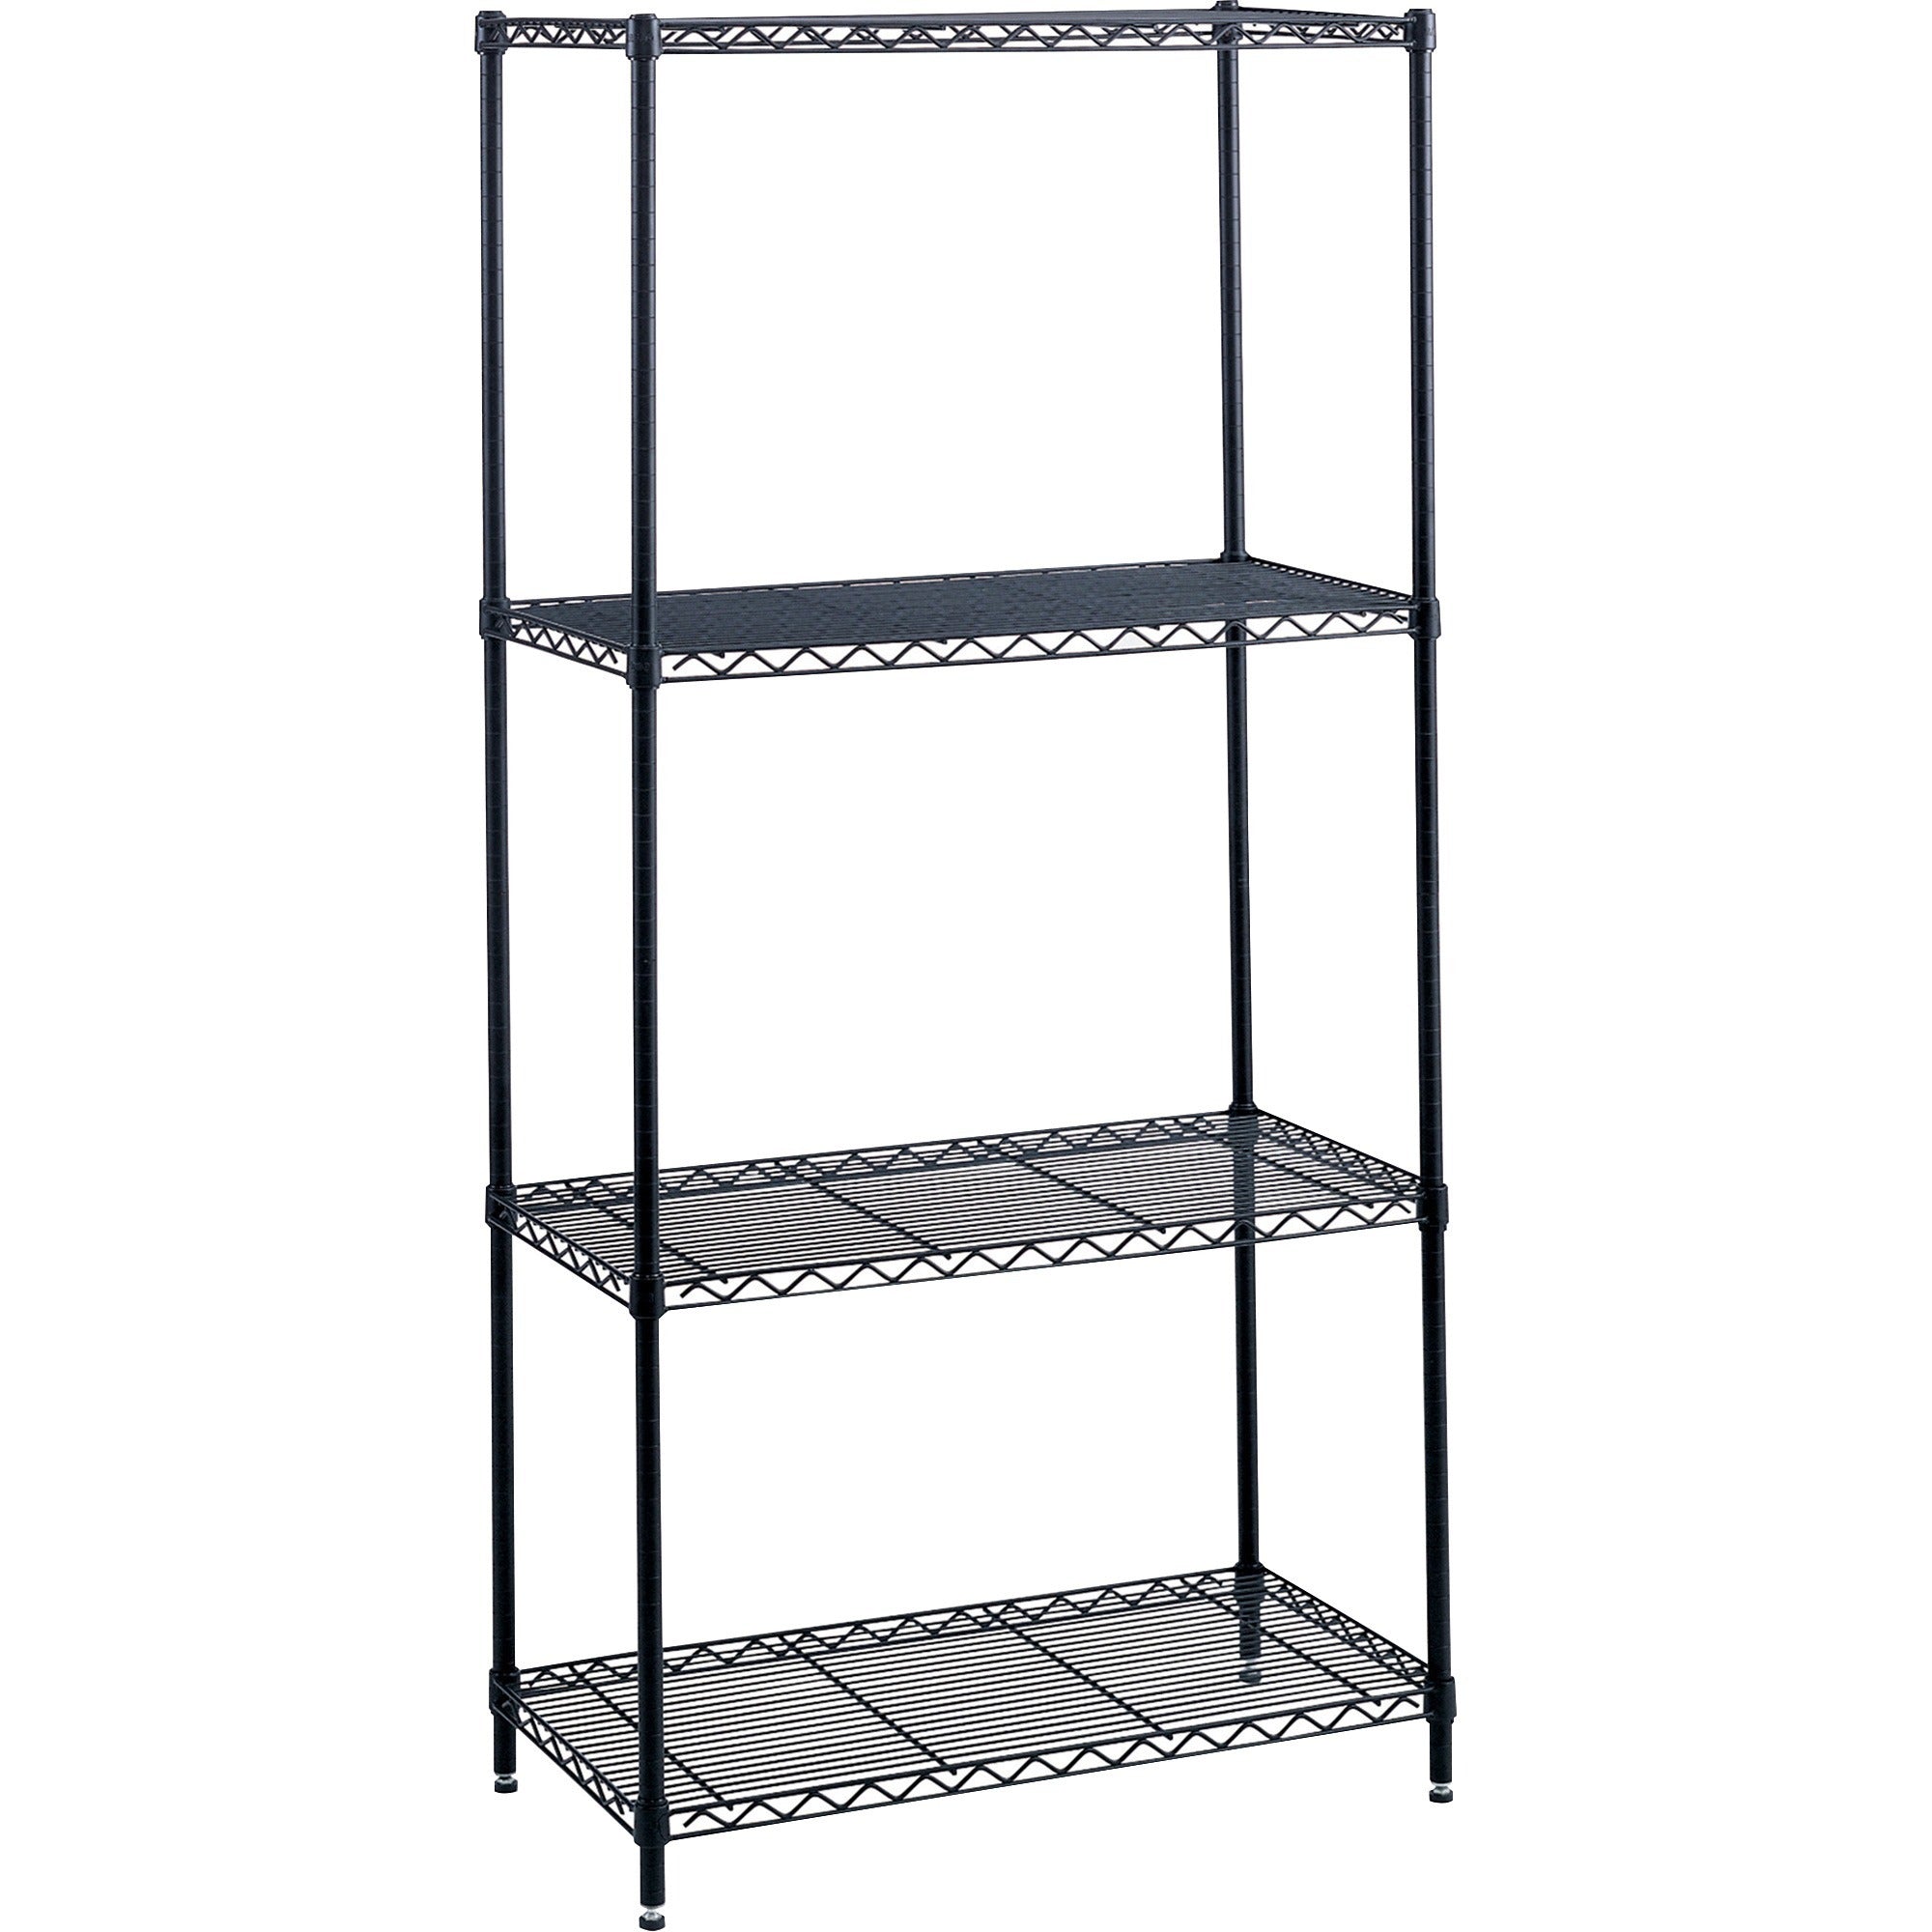 Safco Industrial Wire Shelving - 48" x 18" x 72" - 4 x Shelf(ves) - 1250 lb Load Capacity - Leveling Glide, Dust Proof, Adjustable Leveler, Adjustable Feet - Black - Powder Coated - Steel - Assembly Required - 